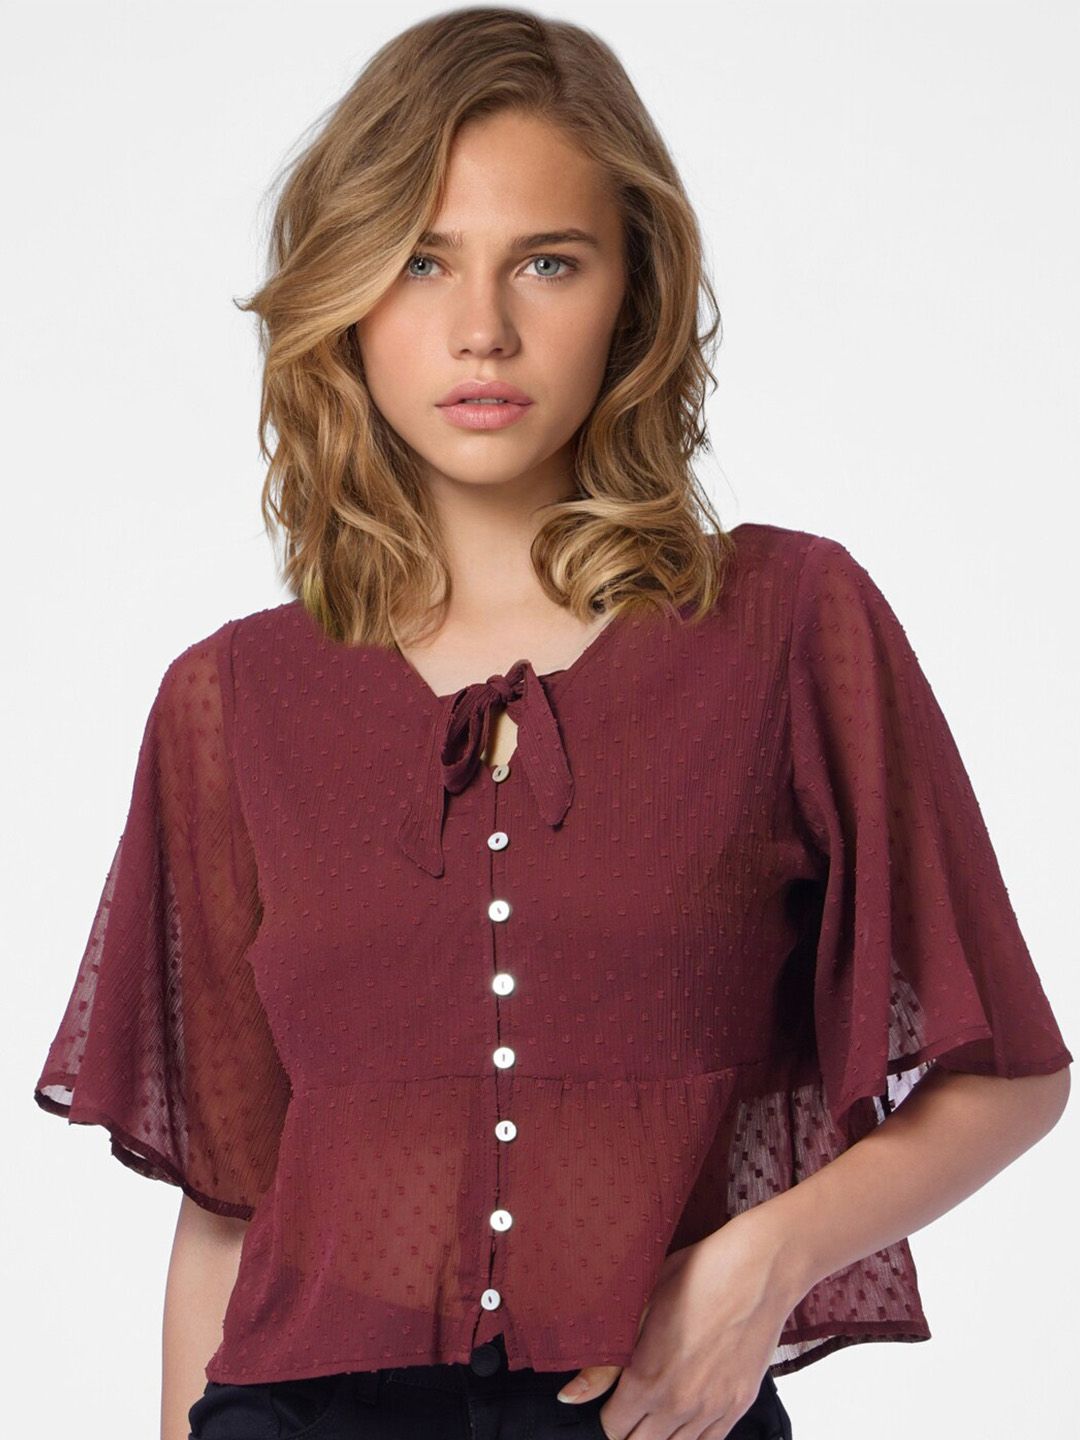 ONLY Women Purple Tie-Up Neck Top Price in India